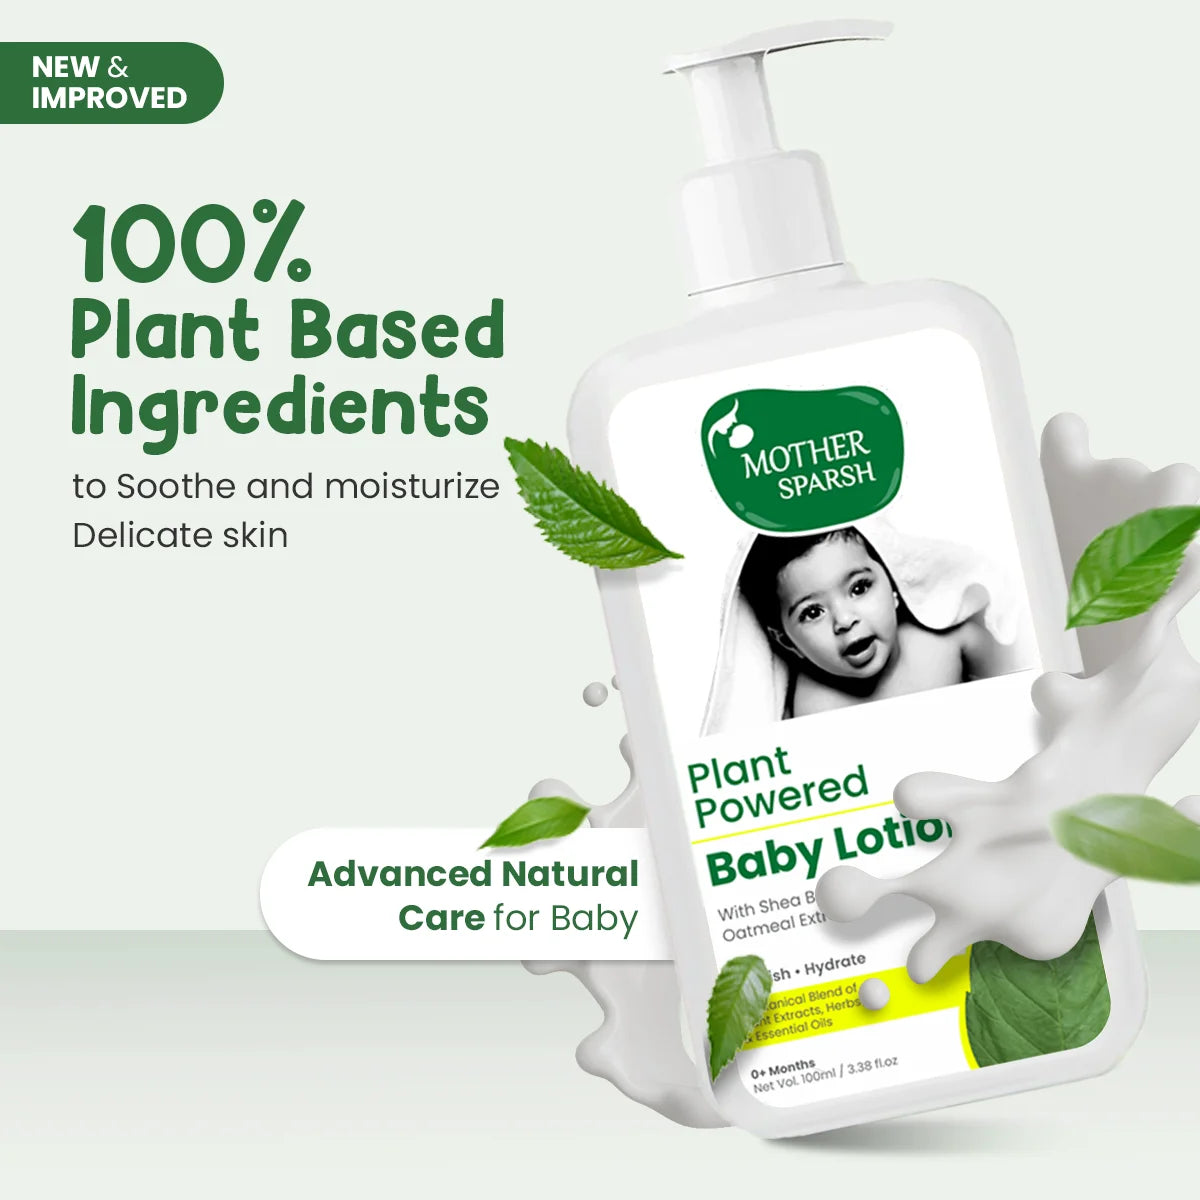 Plant Powered Baby Lotion